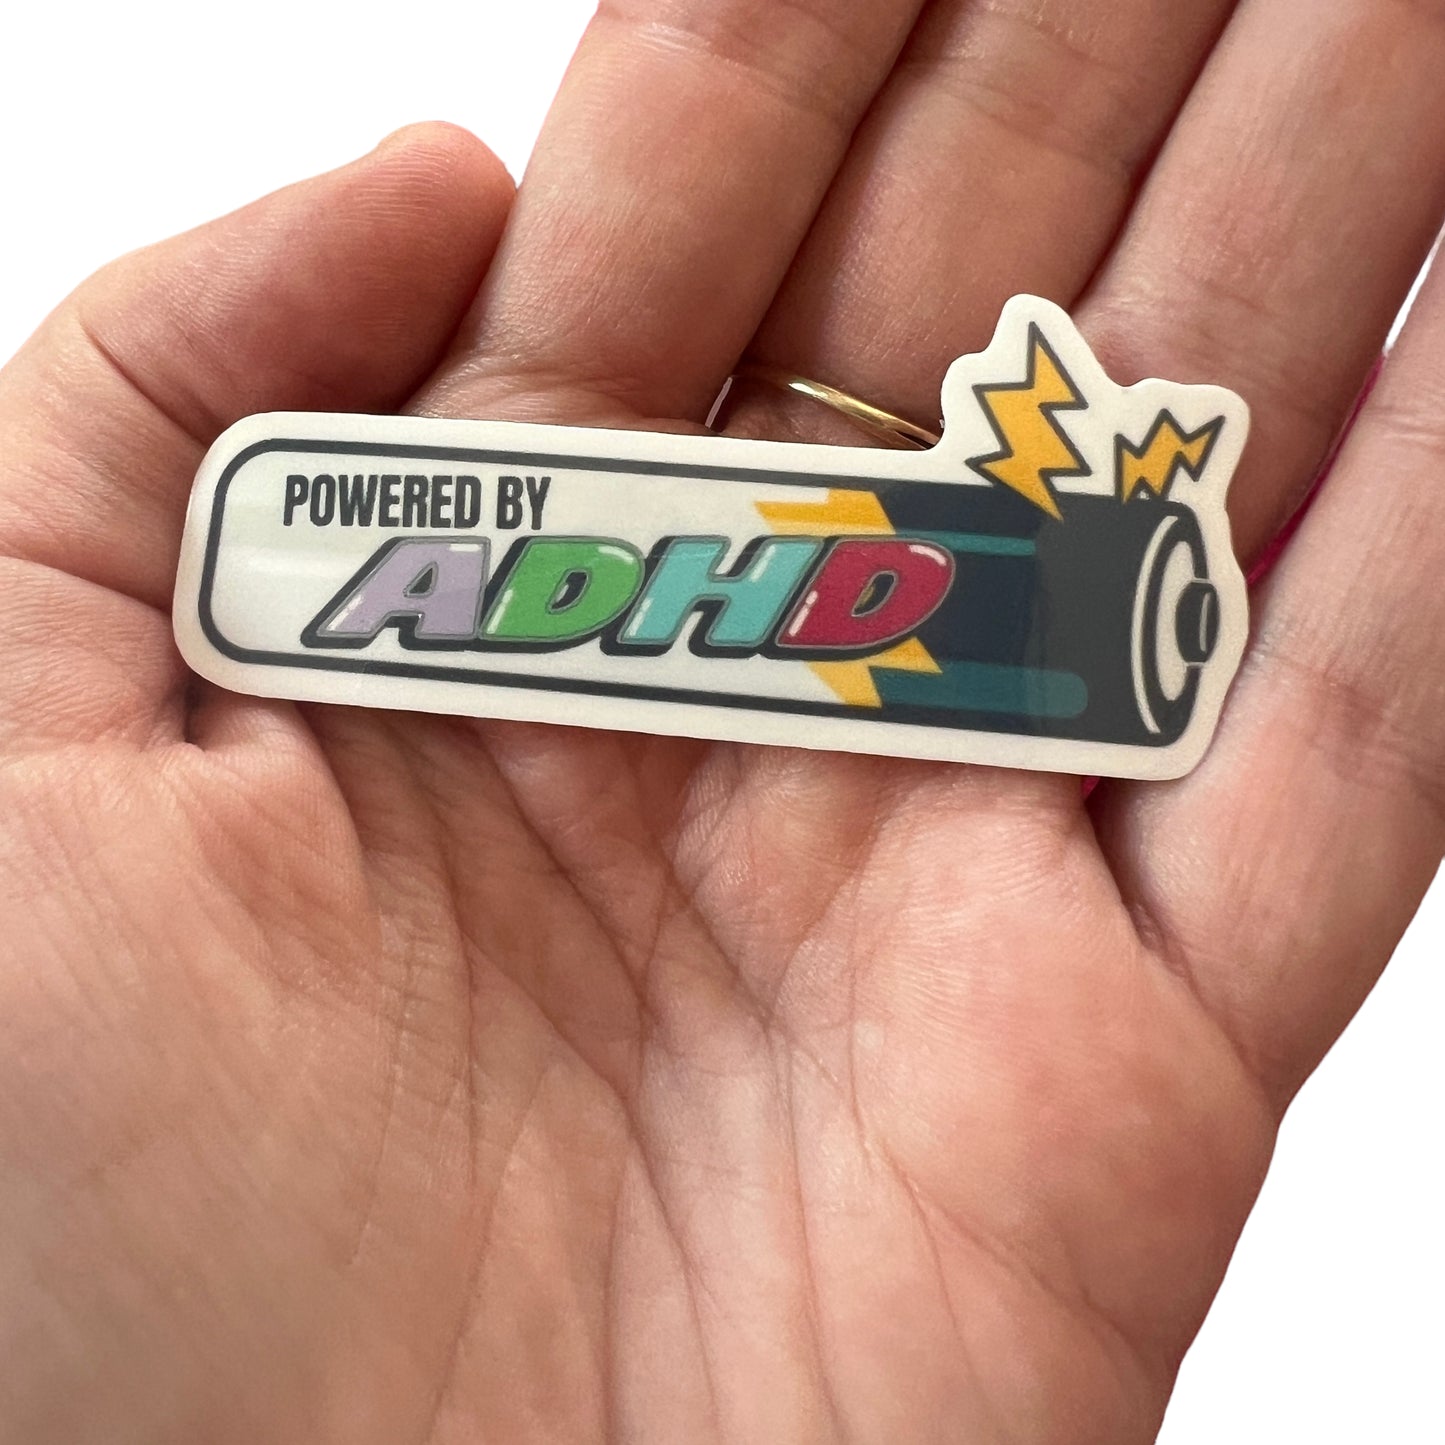 Sticker — ‘Powered By ADHD’ Battery